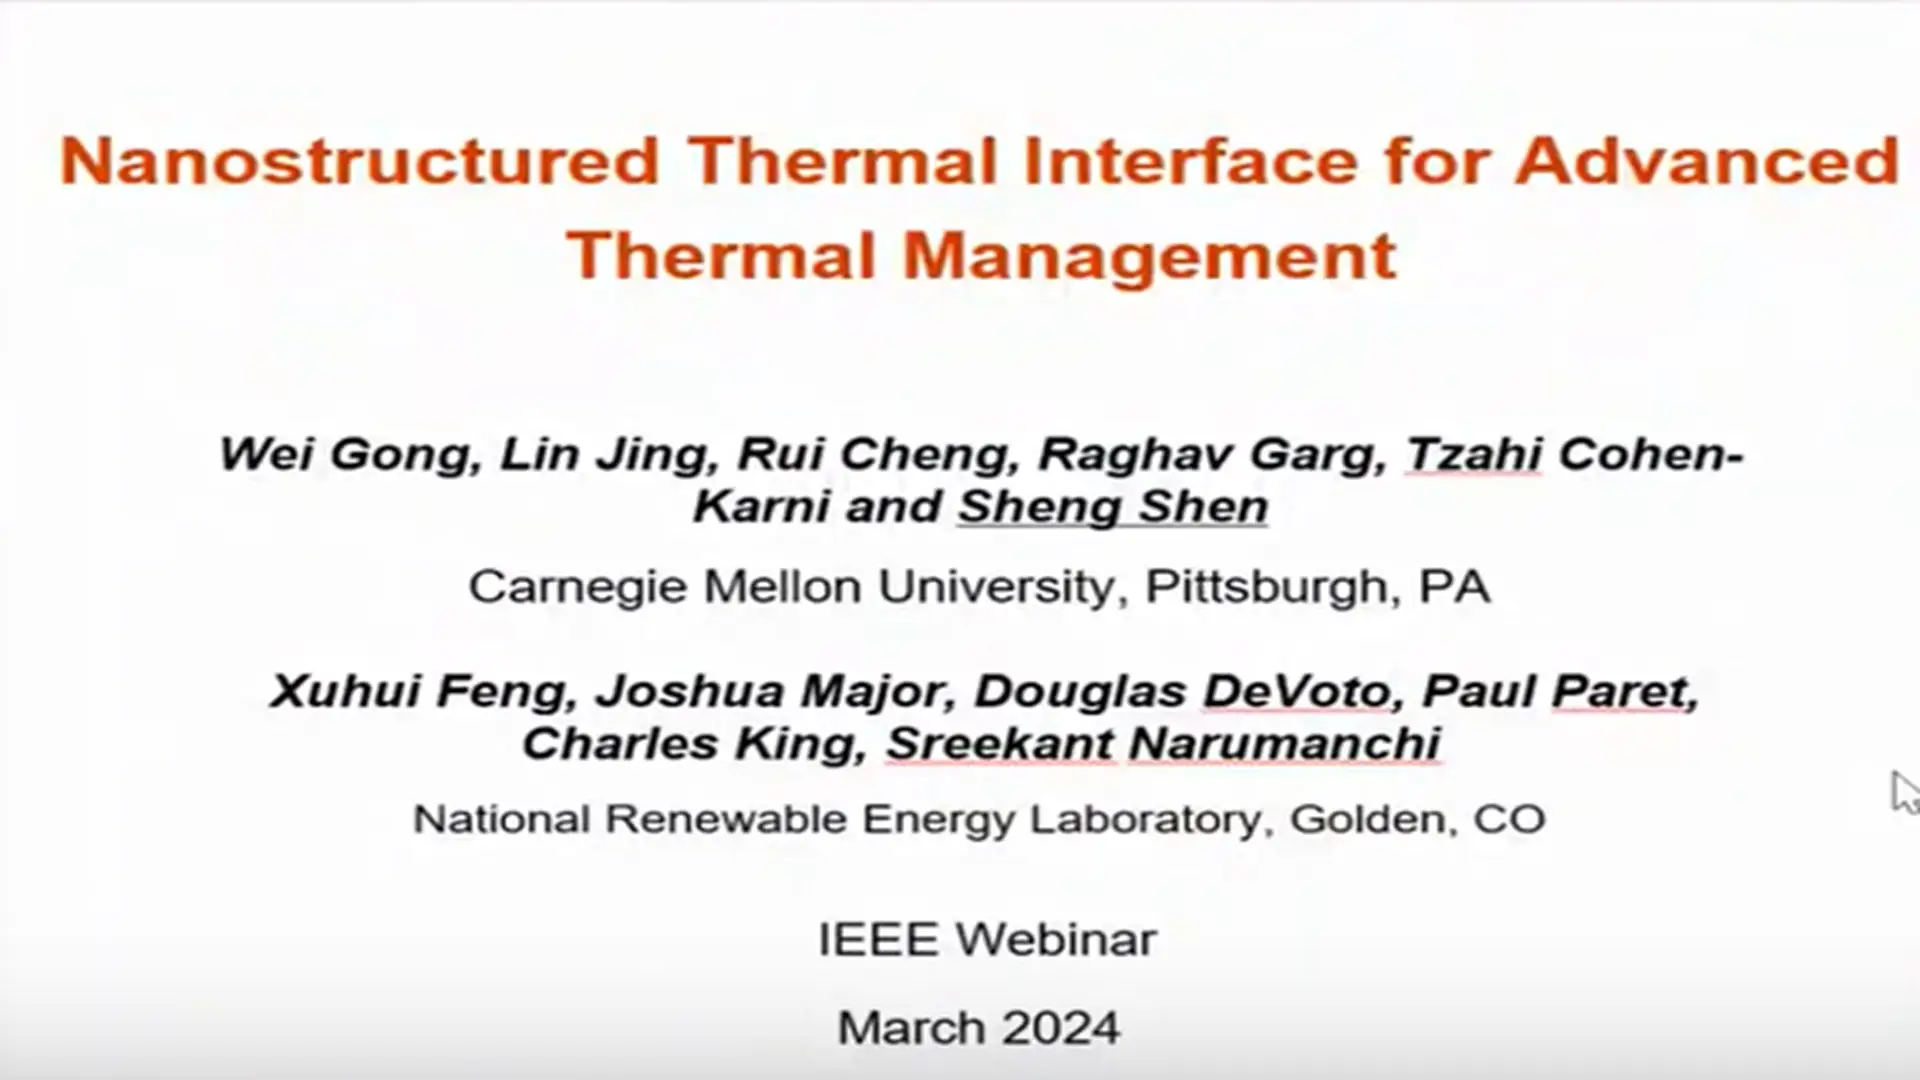 Nanostructured Thermal Interface for Advanced Thermal Management 